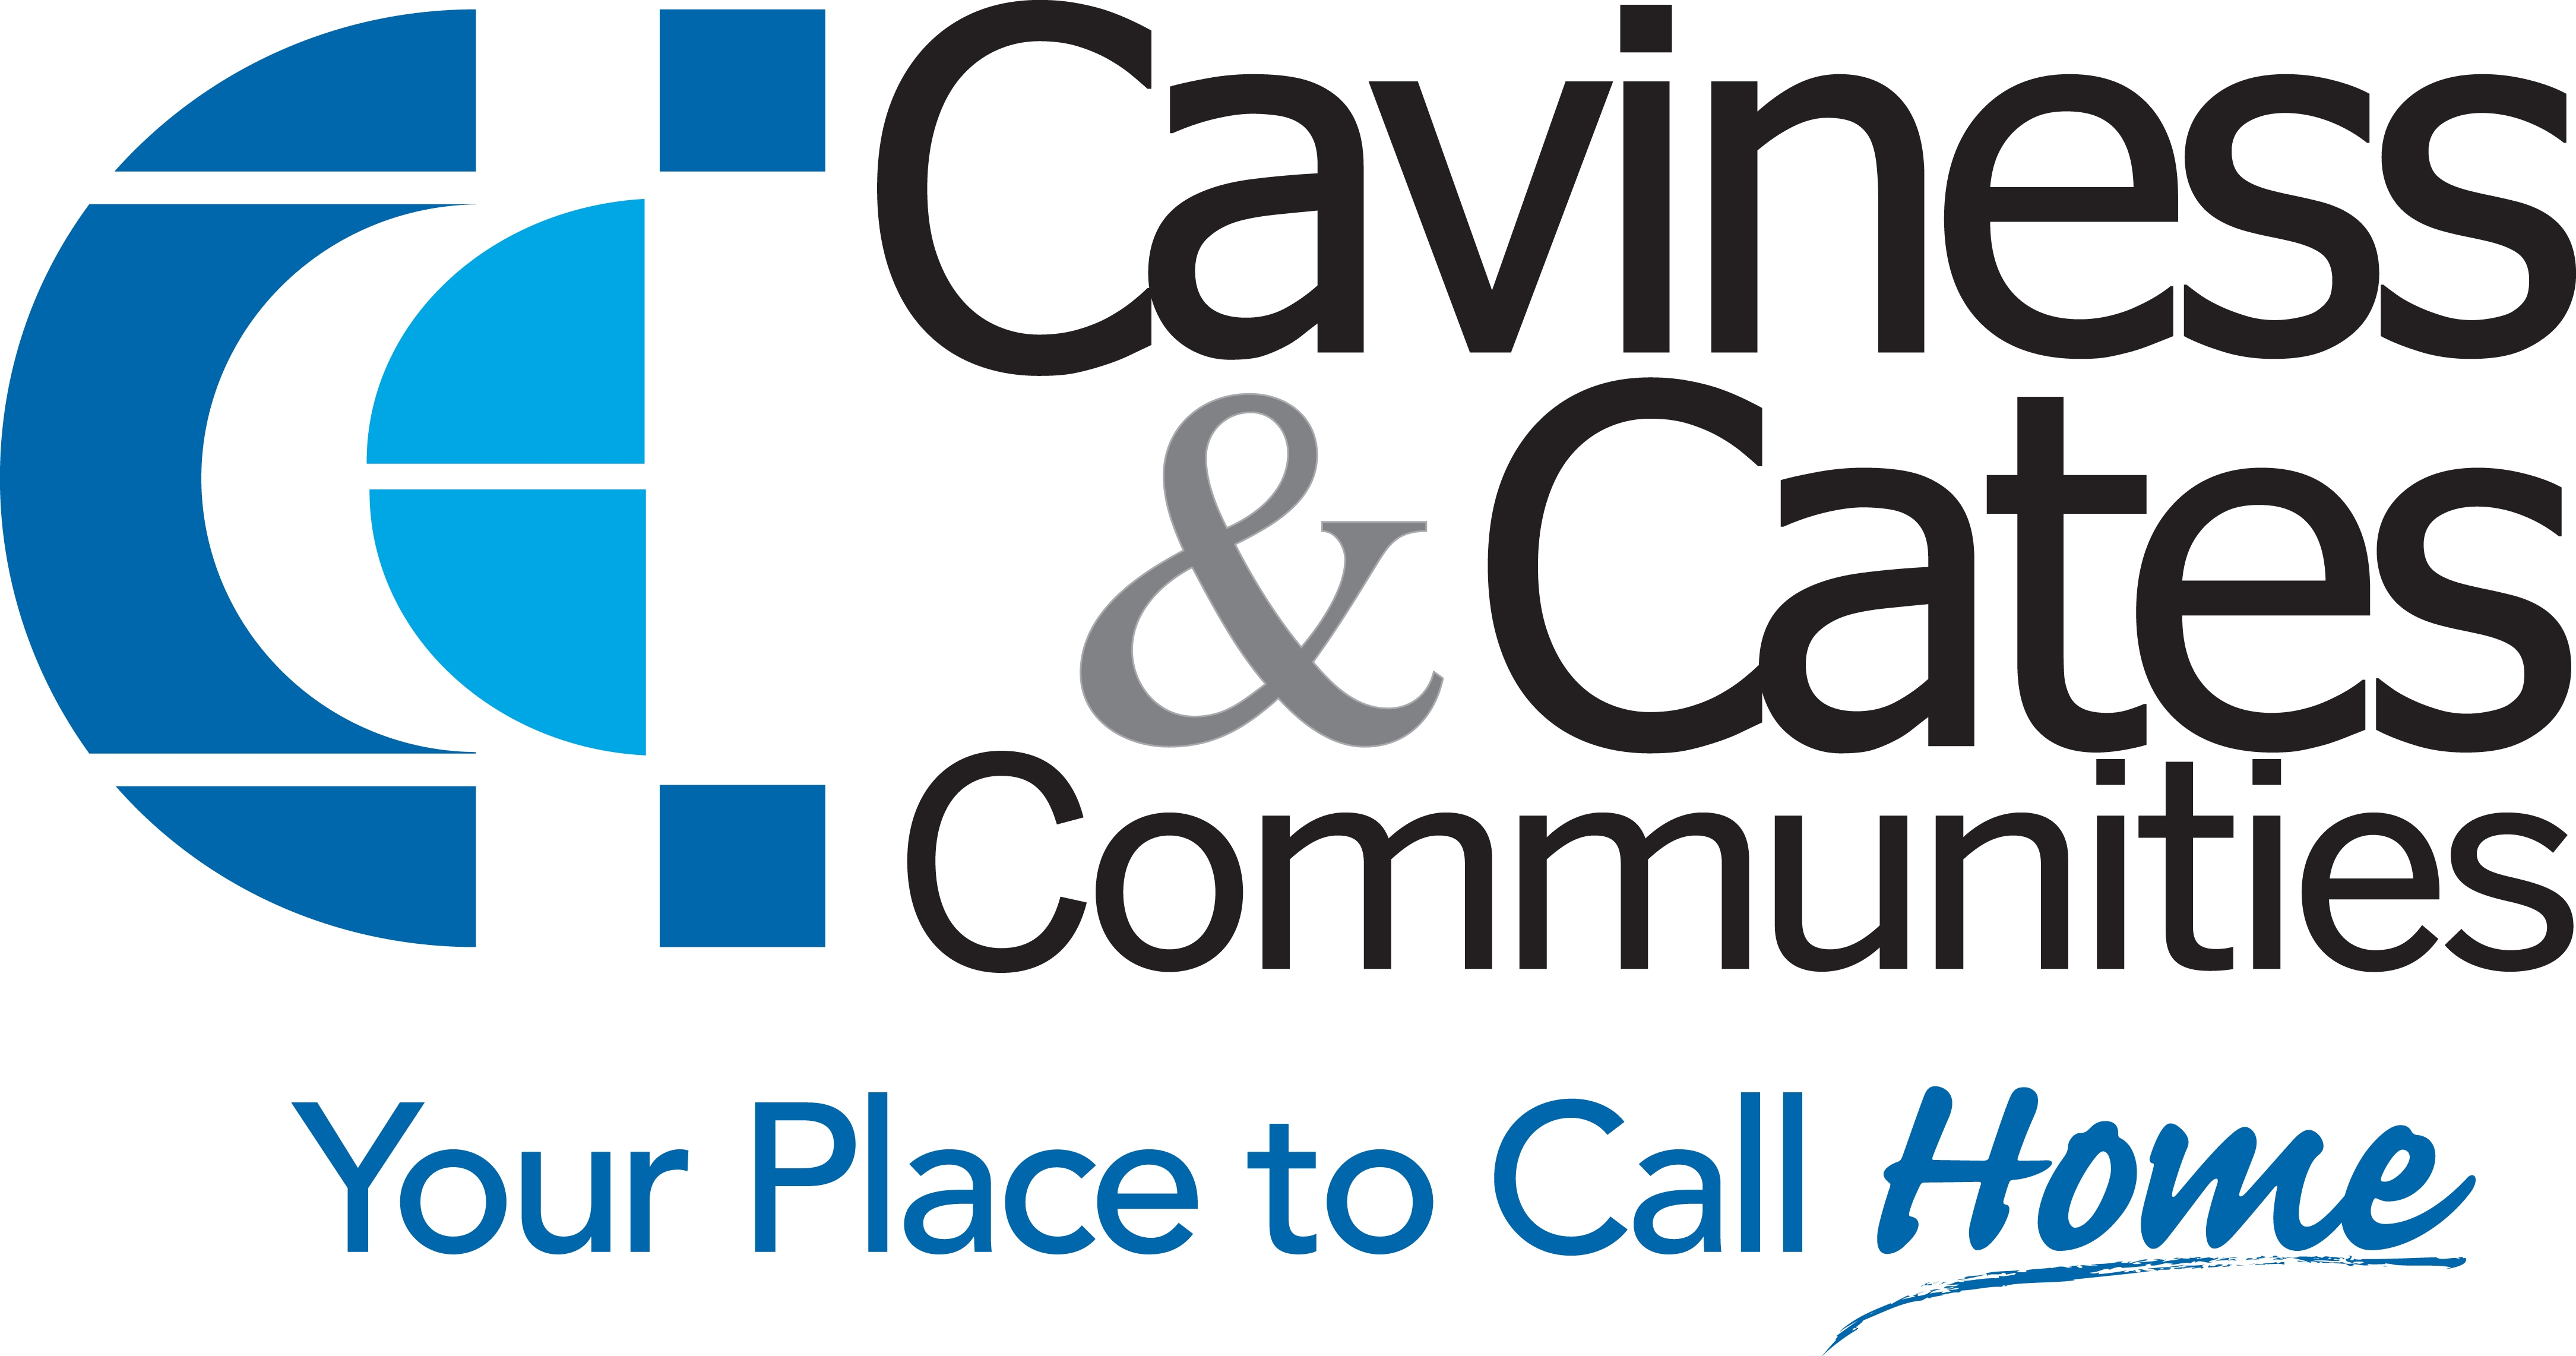 Caviness & Cates Communities Review